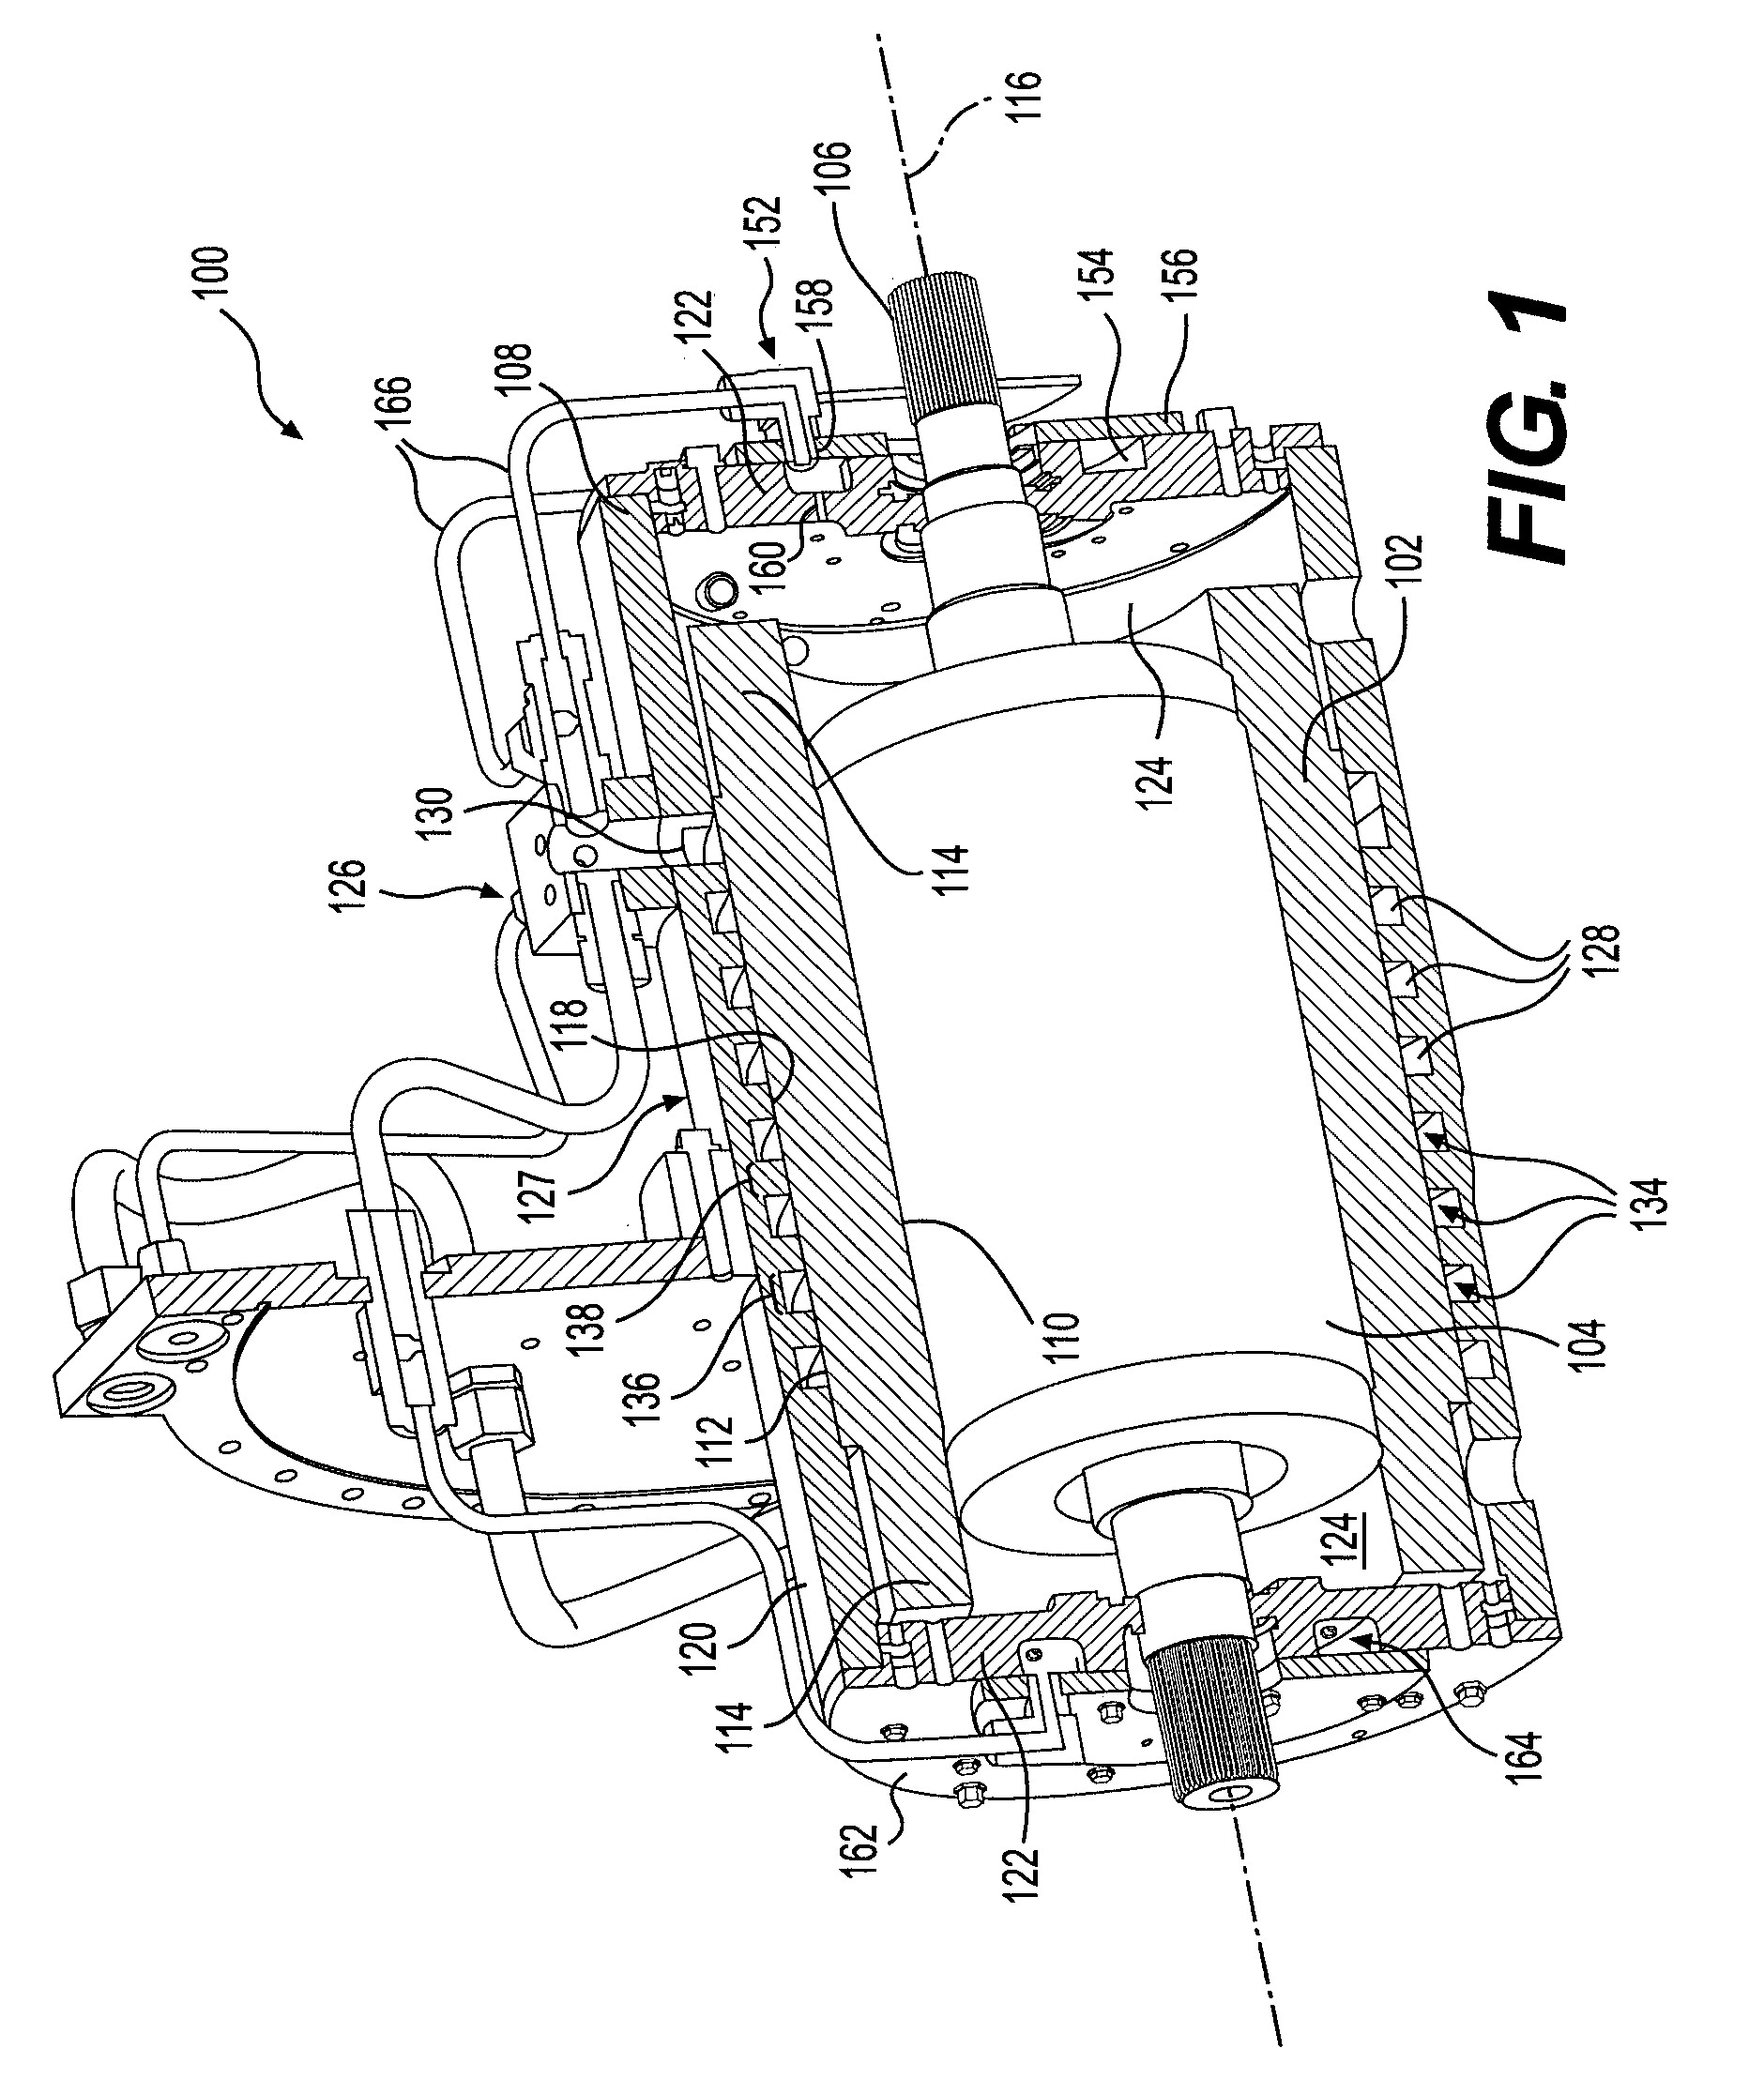 Cooling system for an electric motor